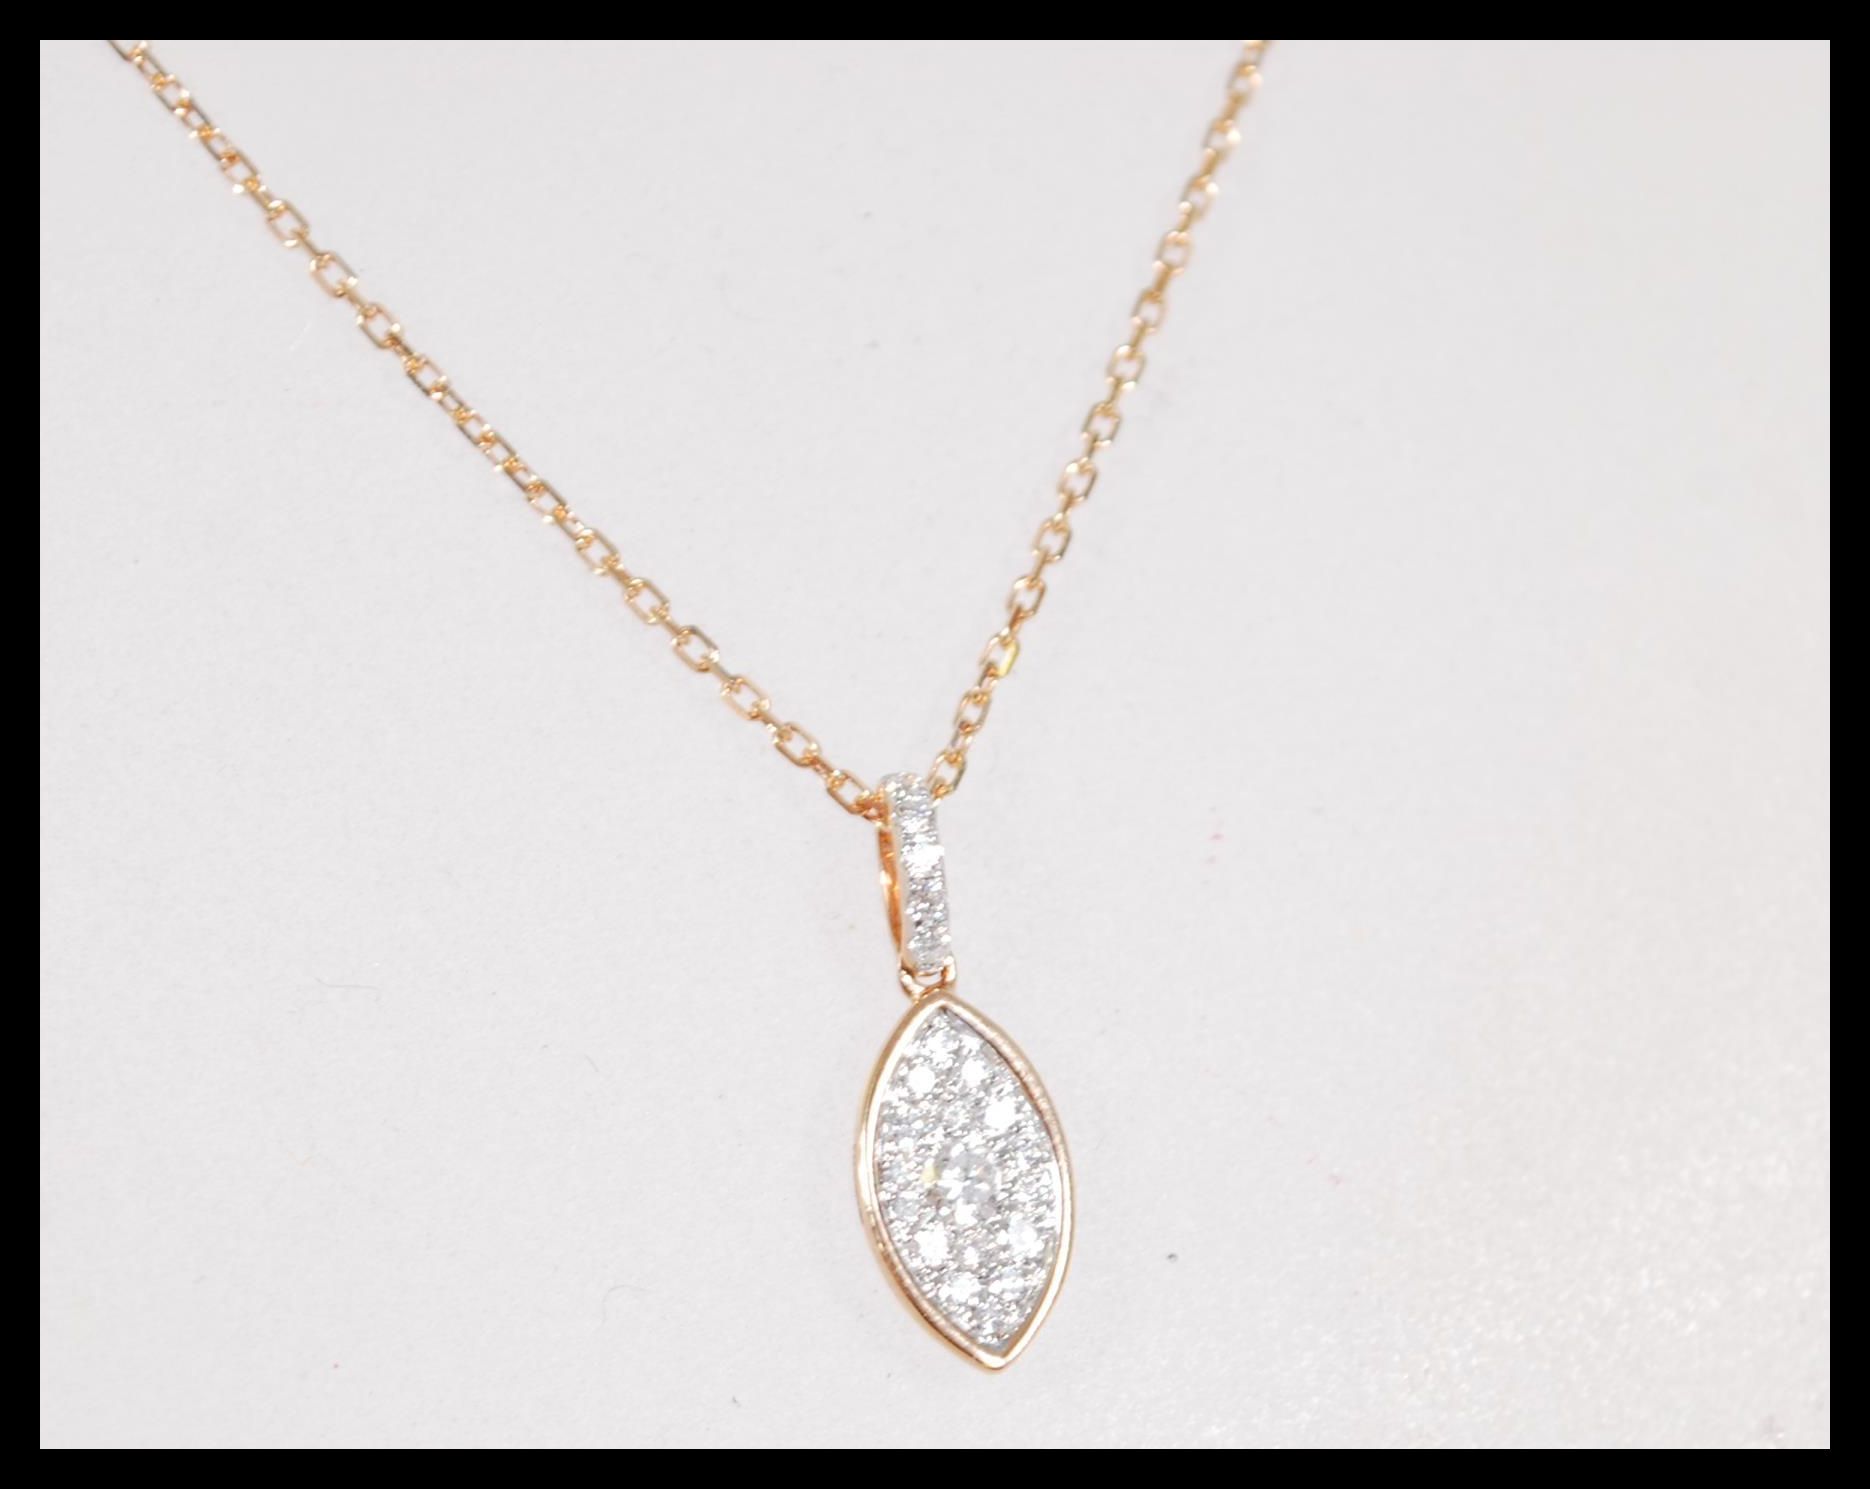 An 19ct rose gold and diamond pendant necklace hav - Image 2 of 3